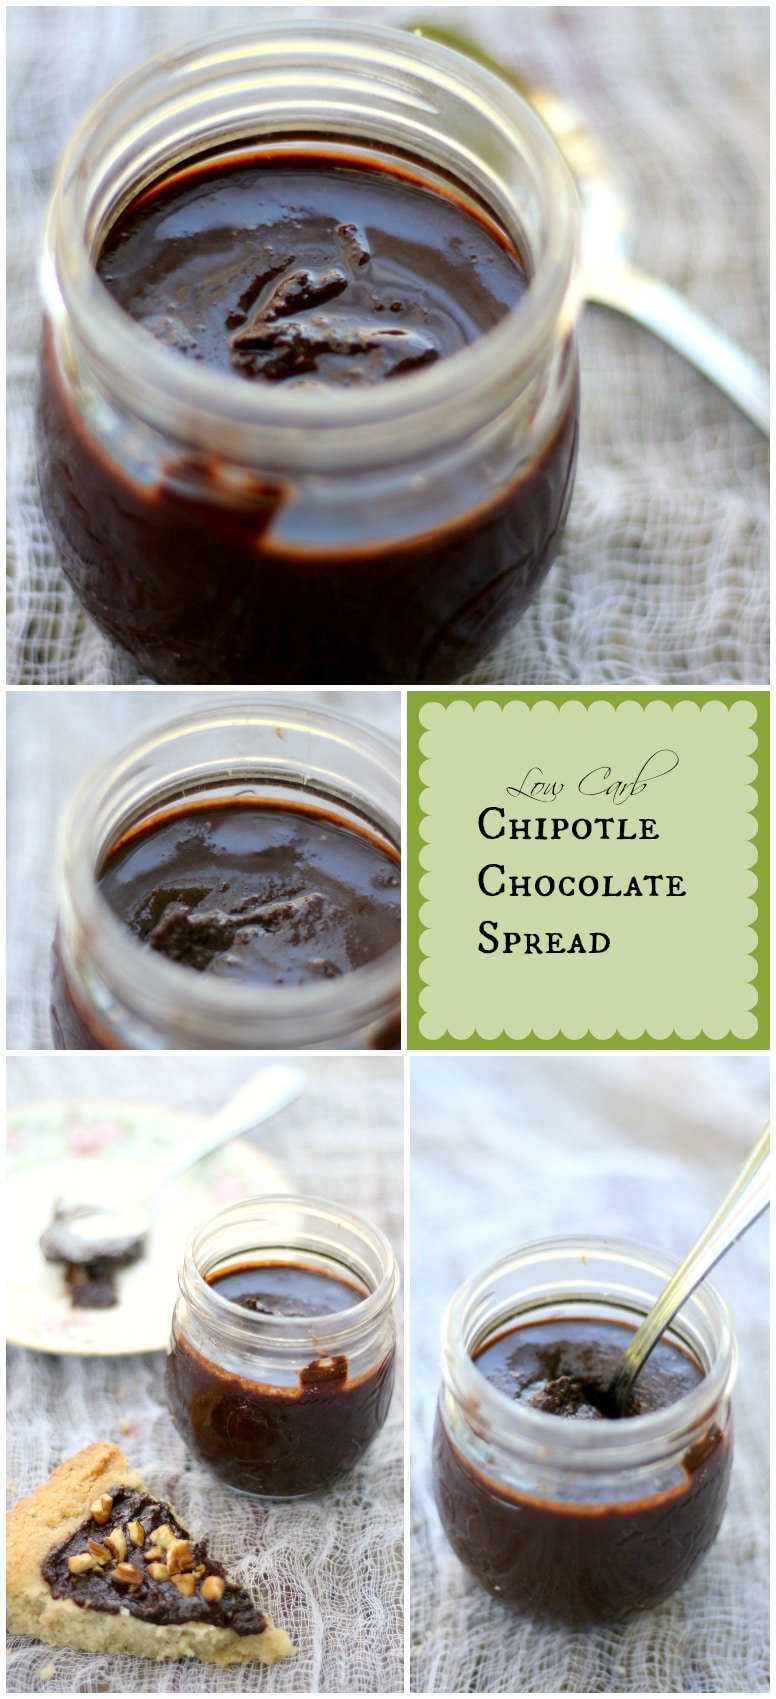 Low carb chocolate spread is a little like Nutella...if Nutella was a Texas thing! Pecans, chipotle, dark chocolate, and just 2.2 net carbs per tablespoon. From Lowcarb-ology.com